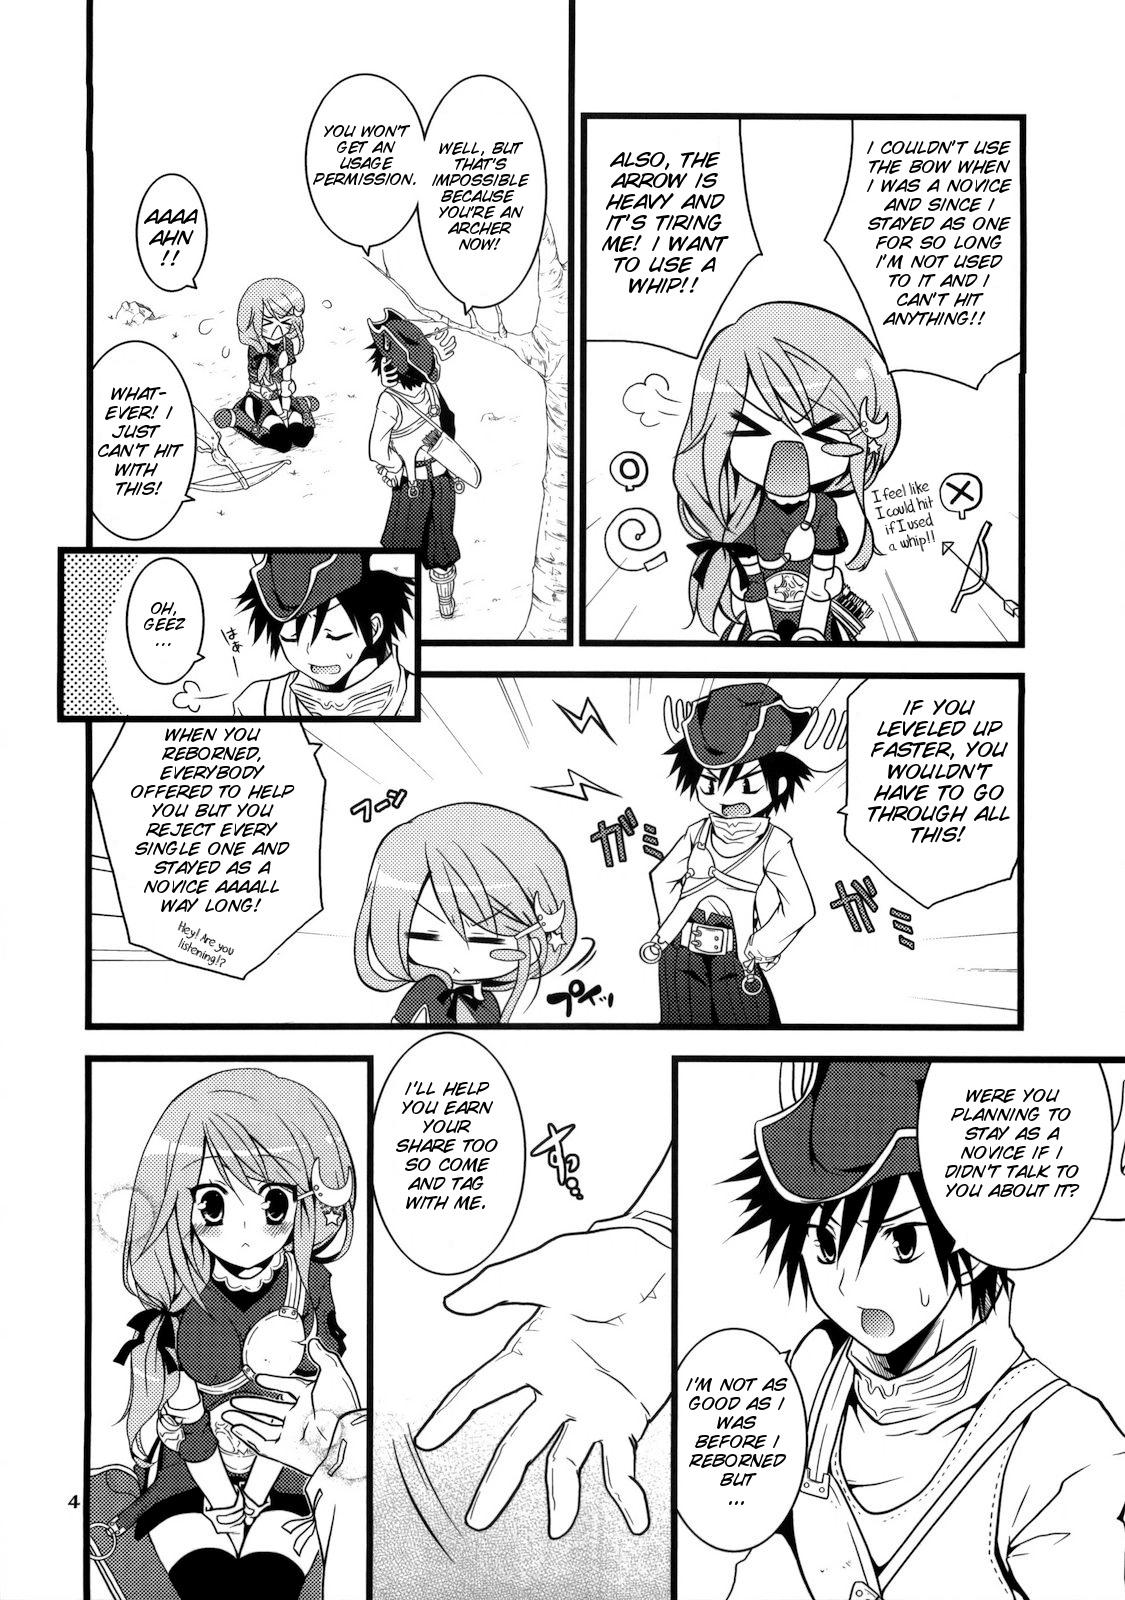 Mulher Daily RO 3 - Ragnarok online Gay Physicals - Page 6